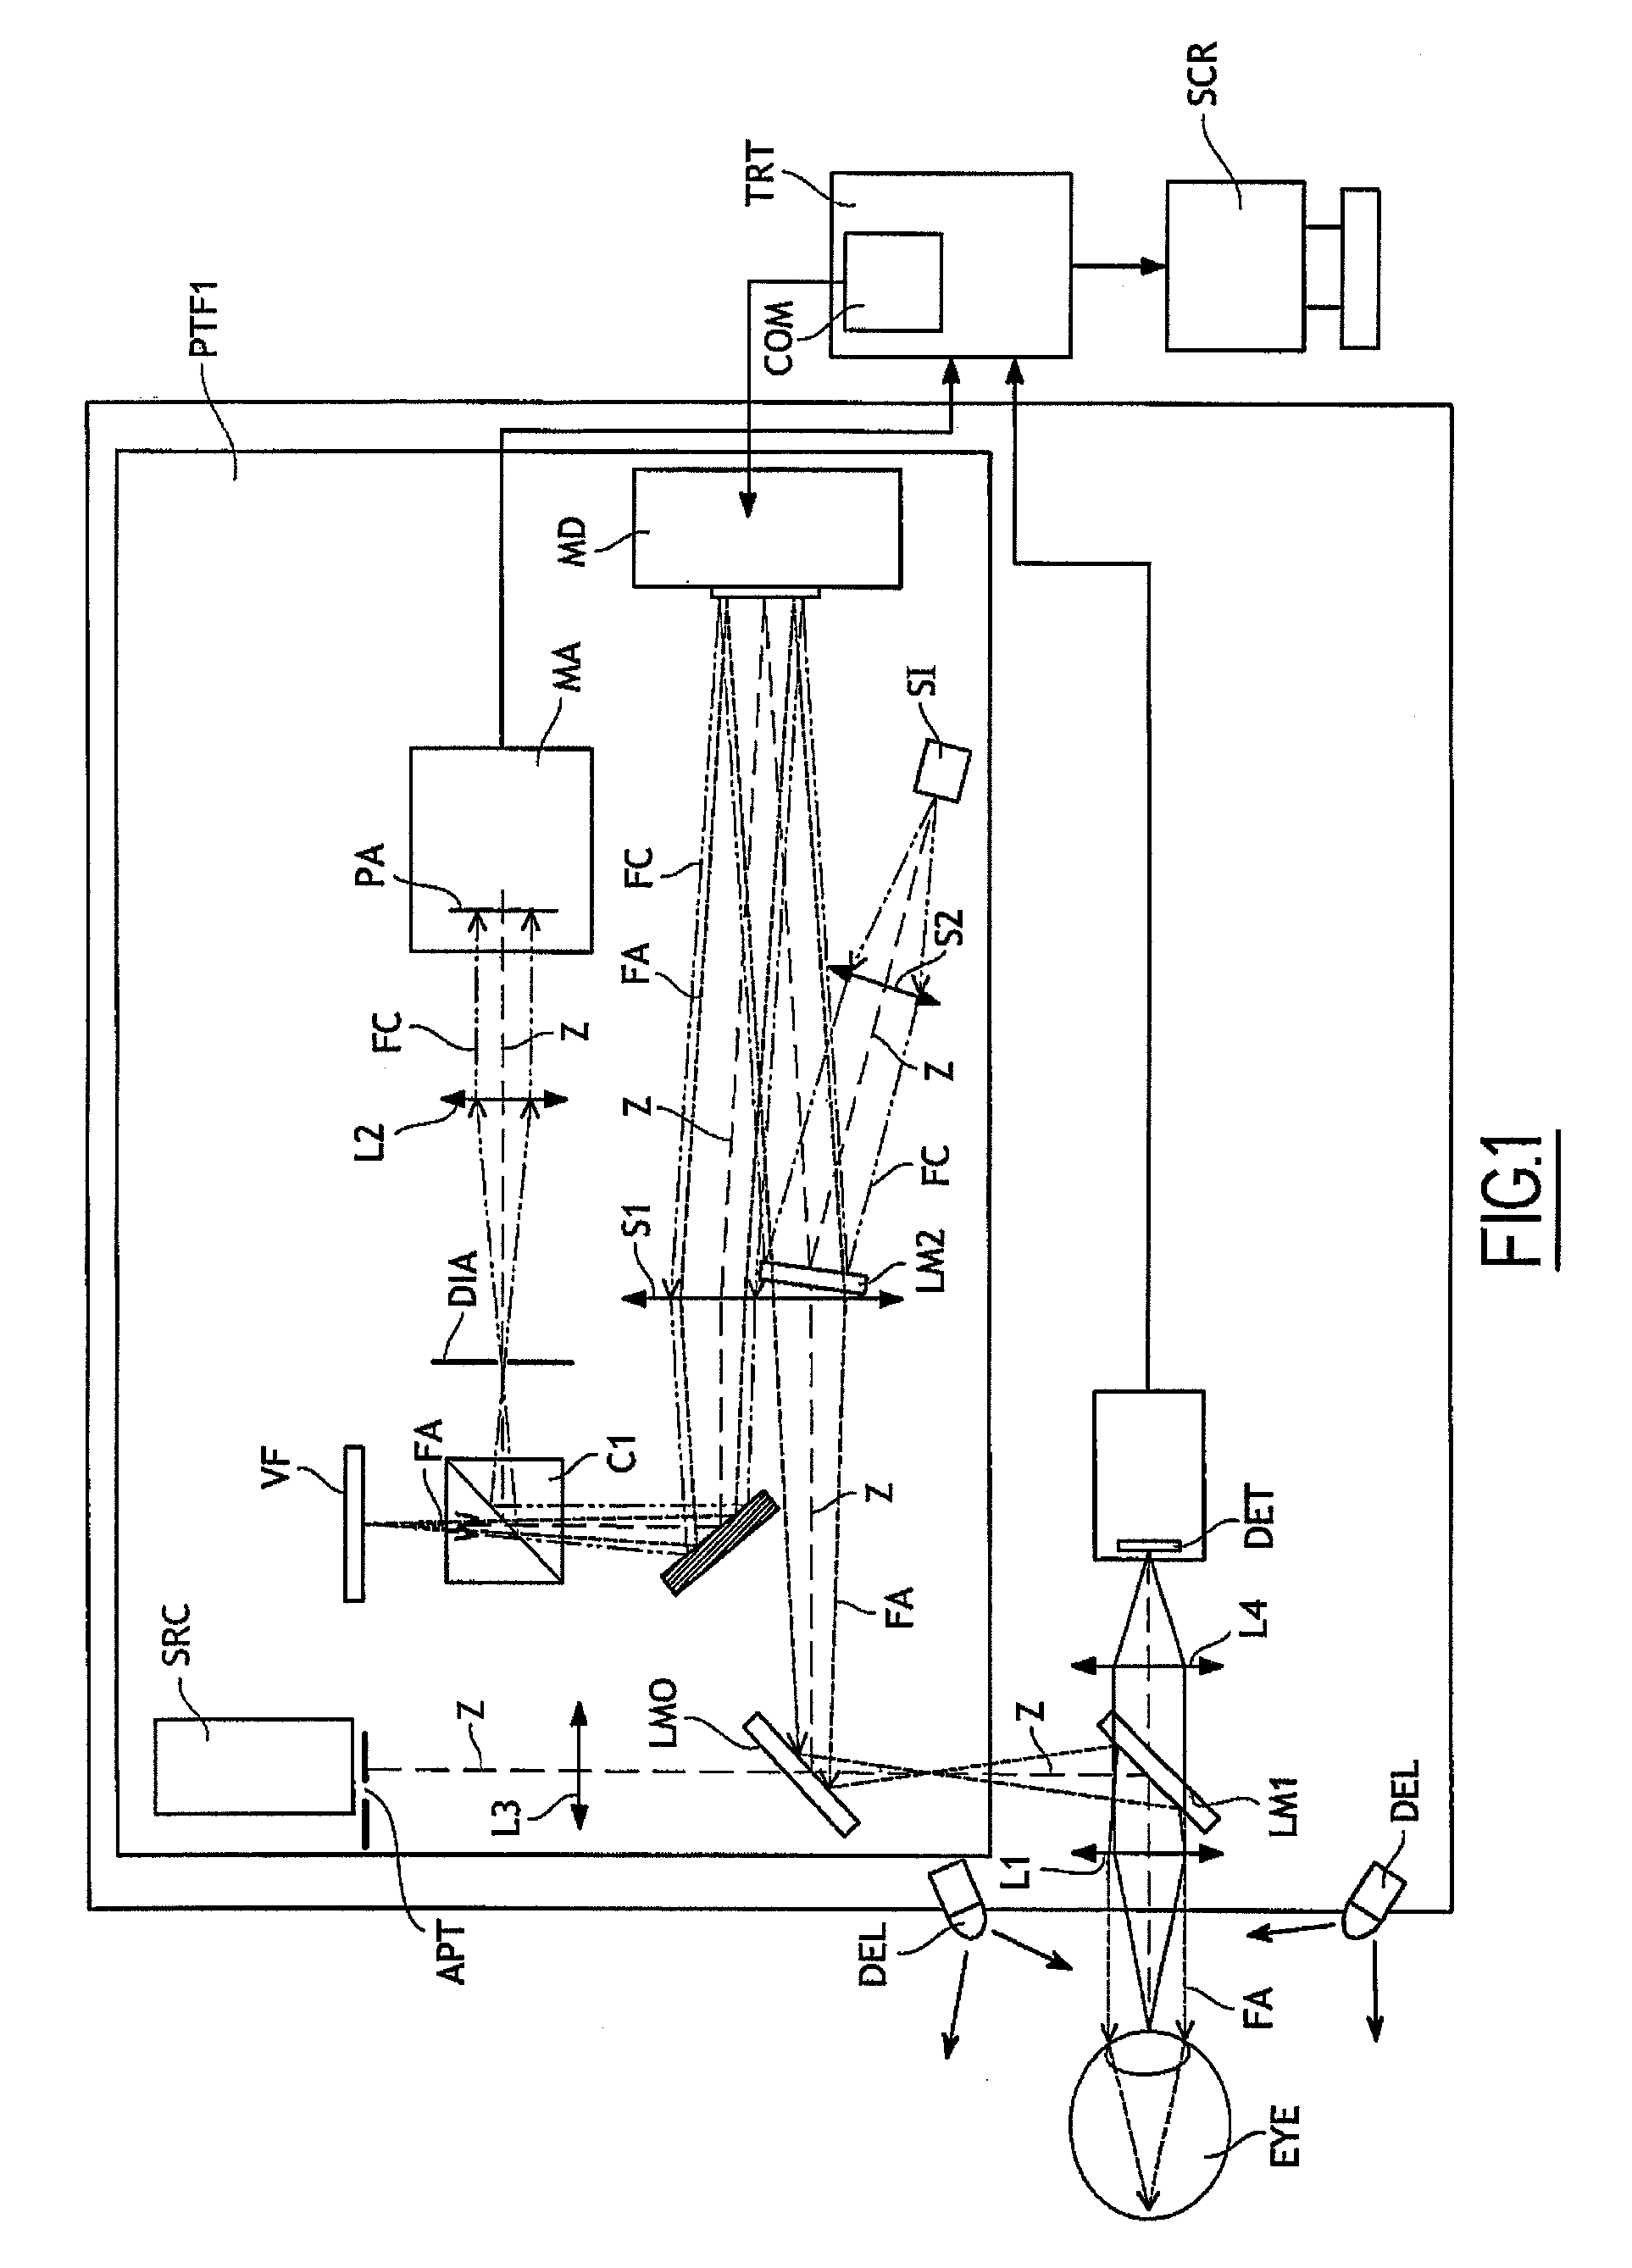 Phase modulation device for an ophthalmic instrument, ophthalmic instruments equipped with such device, and related calibration method